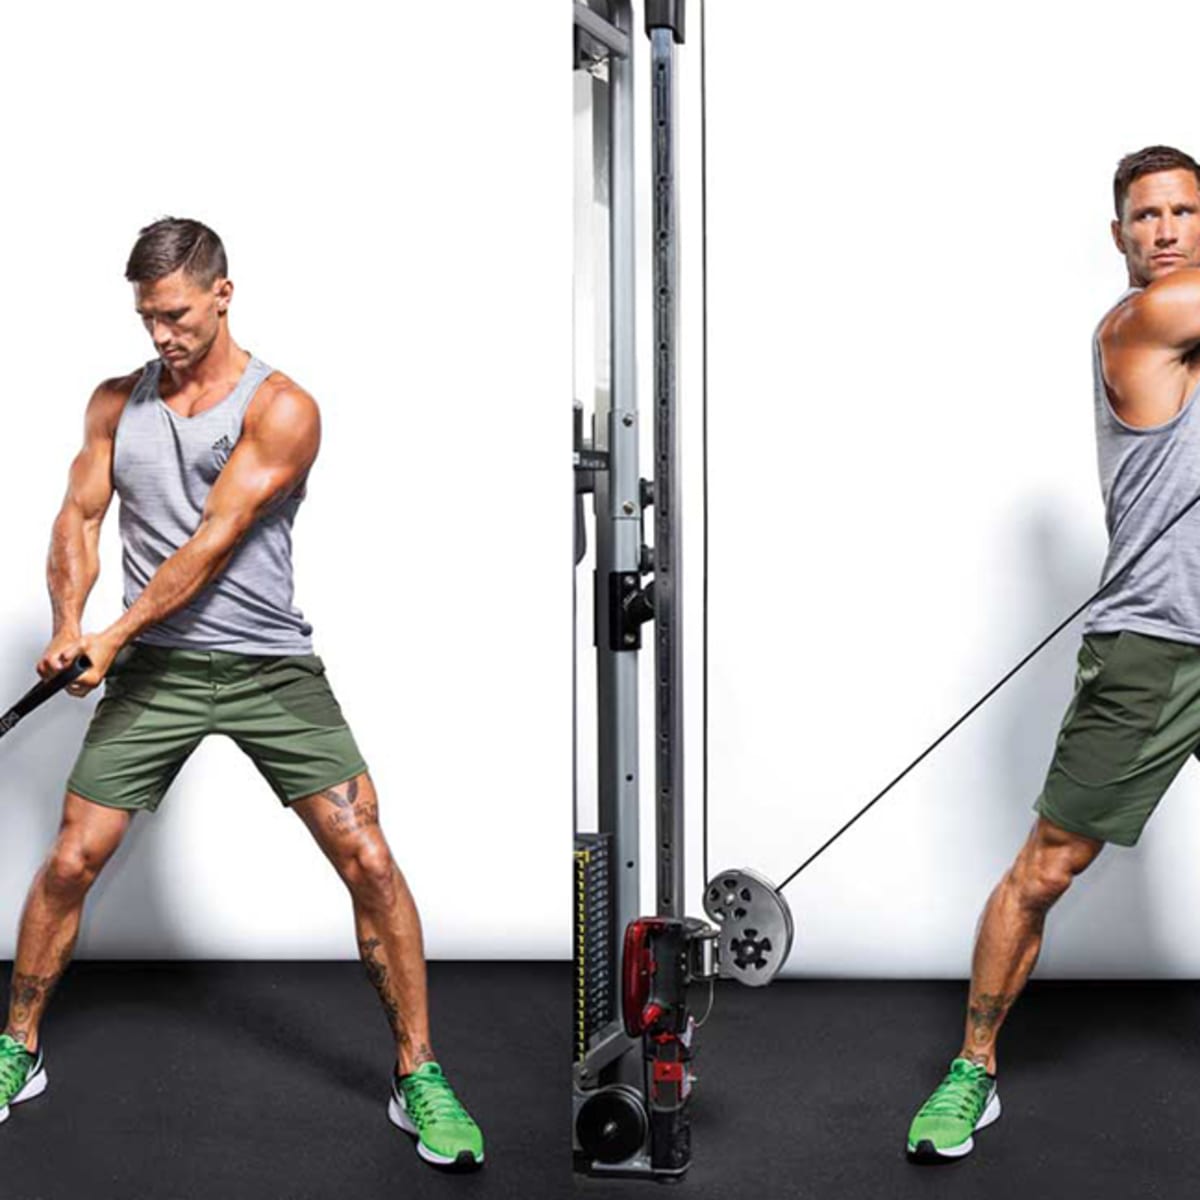 FULL BODY CABLE WORKOUT